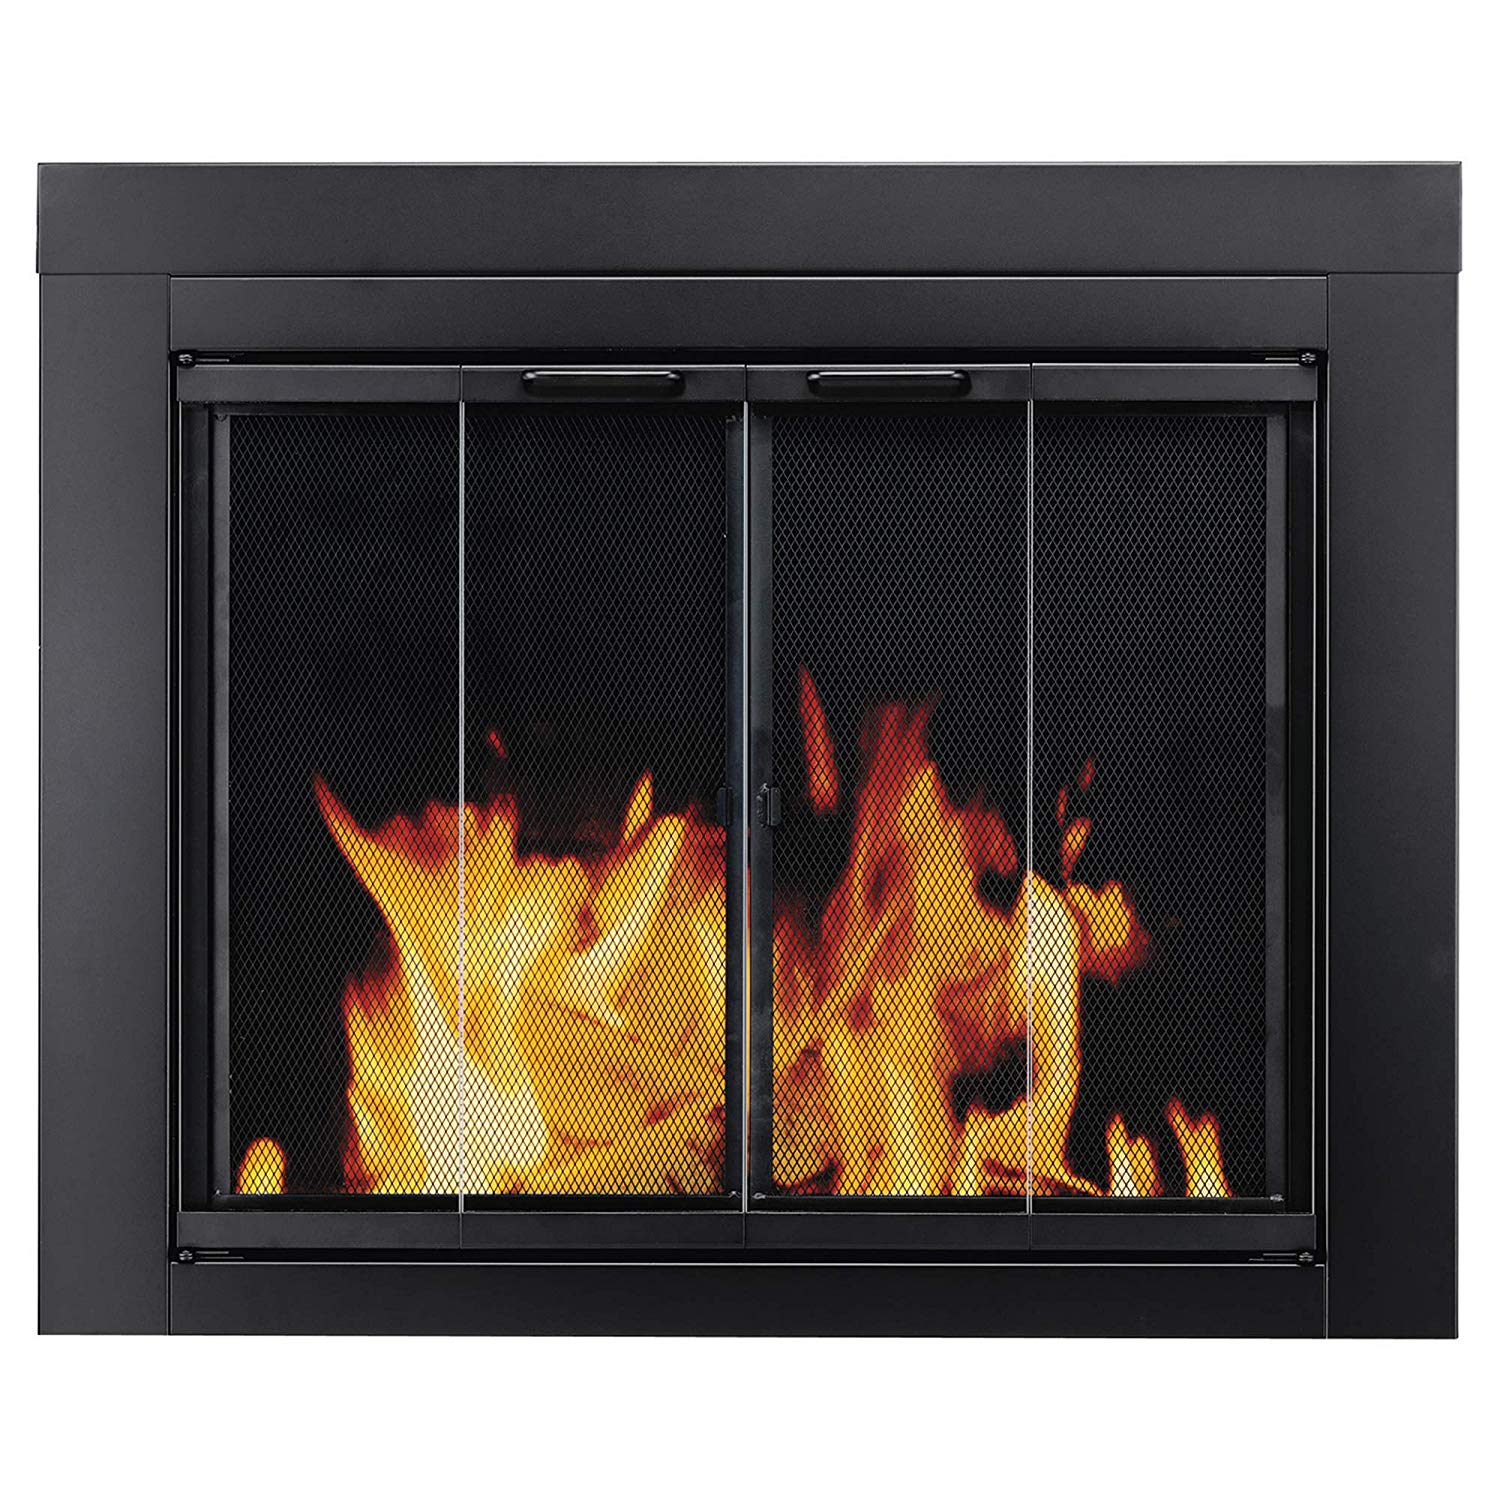 Add Fireplace to House New Pleasant Hearth at 1000 ascot Fireplace Glass Door Black Small